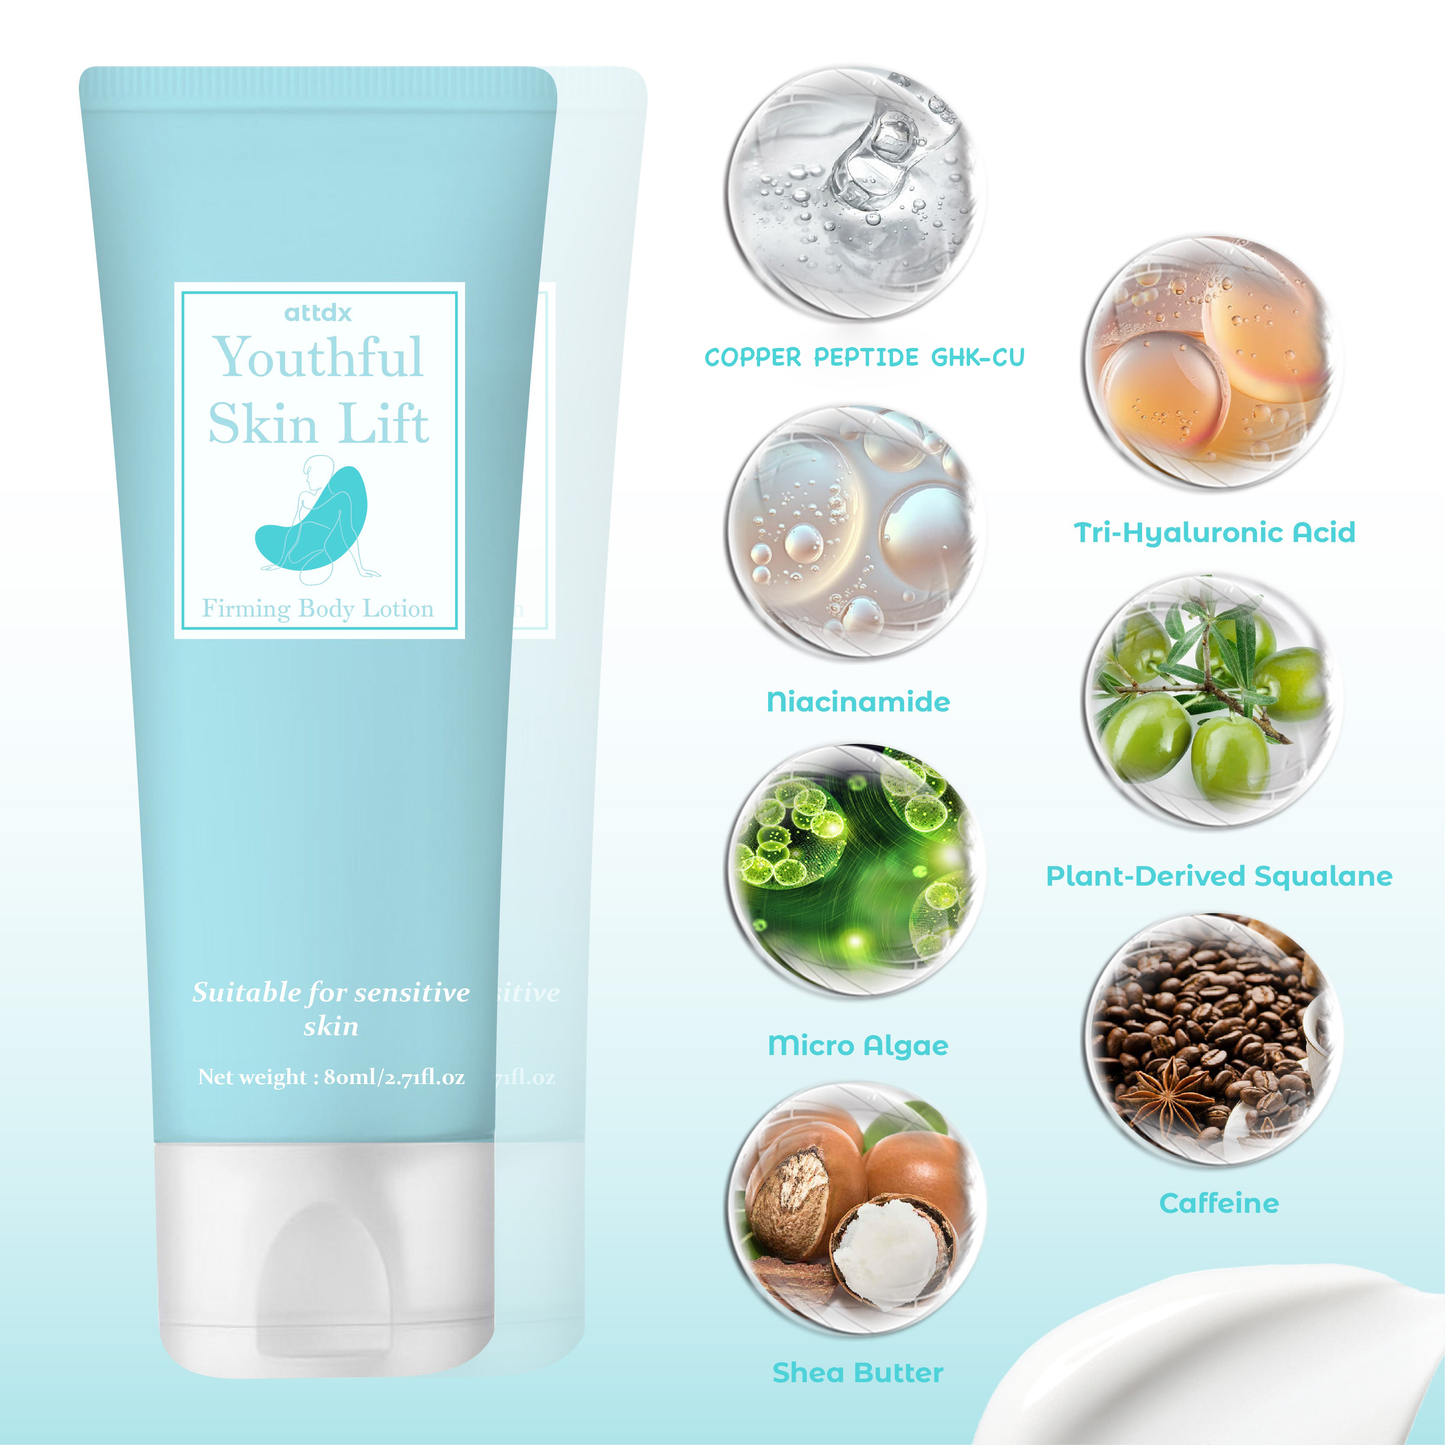 SkinLift Youthful Firming Body Lotion Y